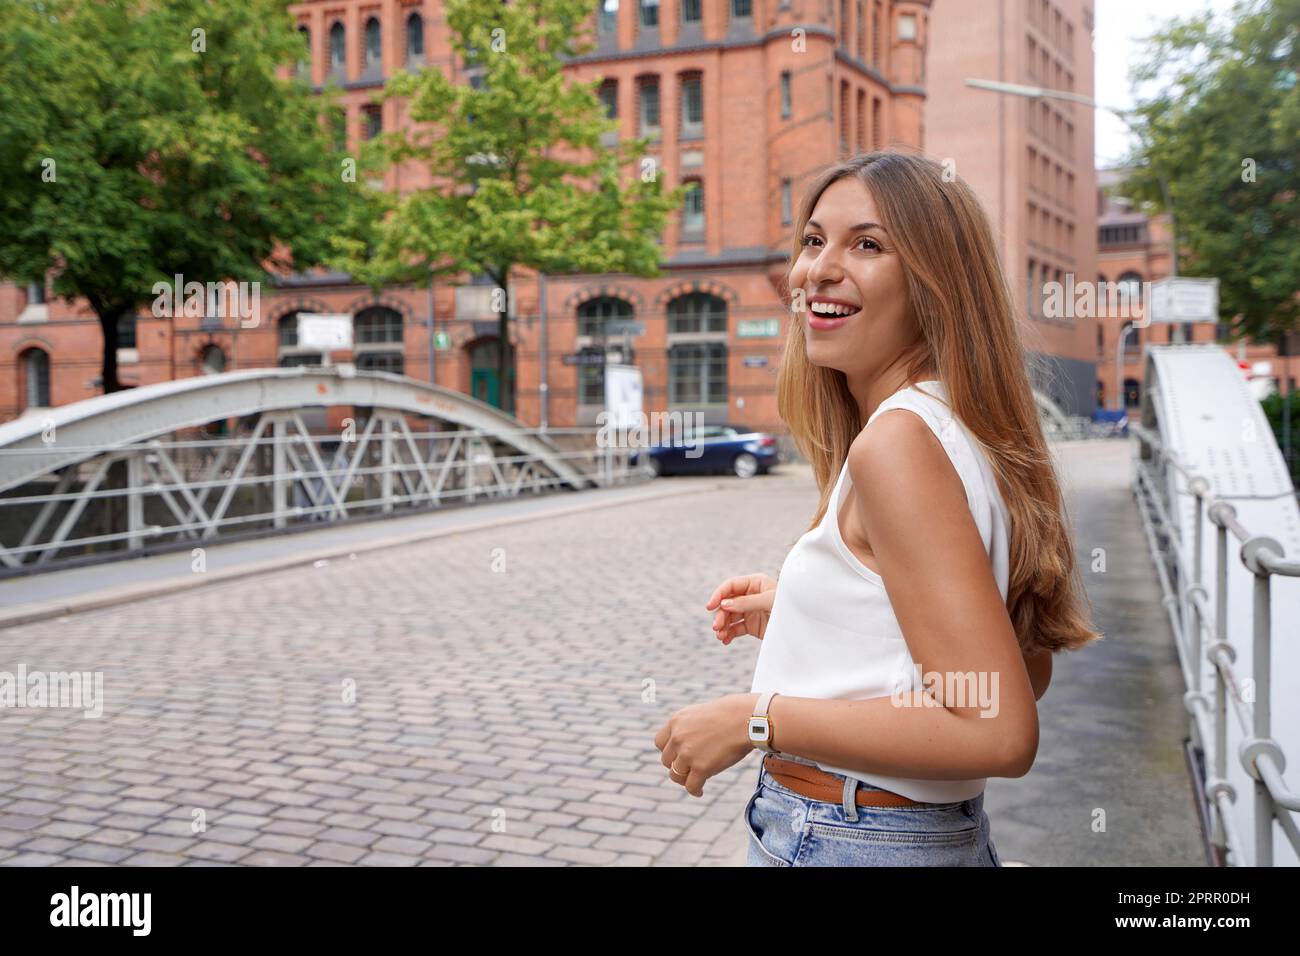 Attractive positive woman turns around and looking to the side in a Northern European city street Stock Photo